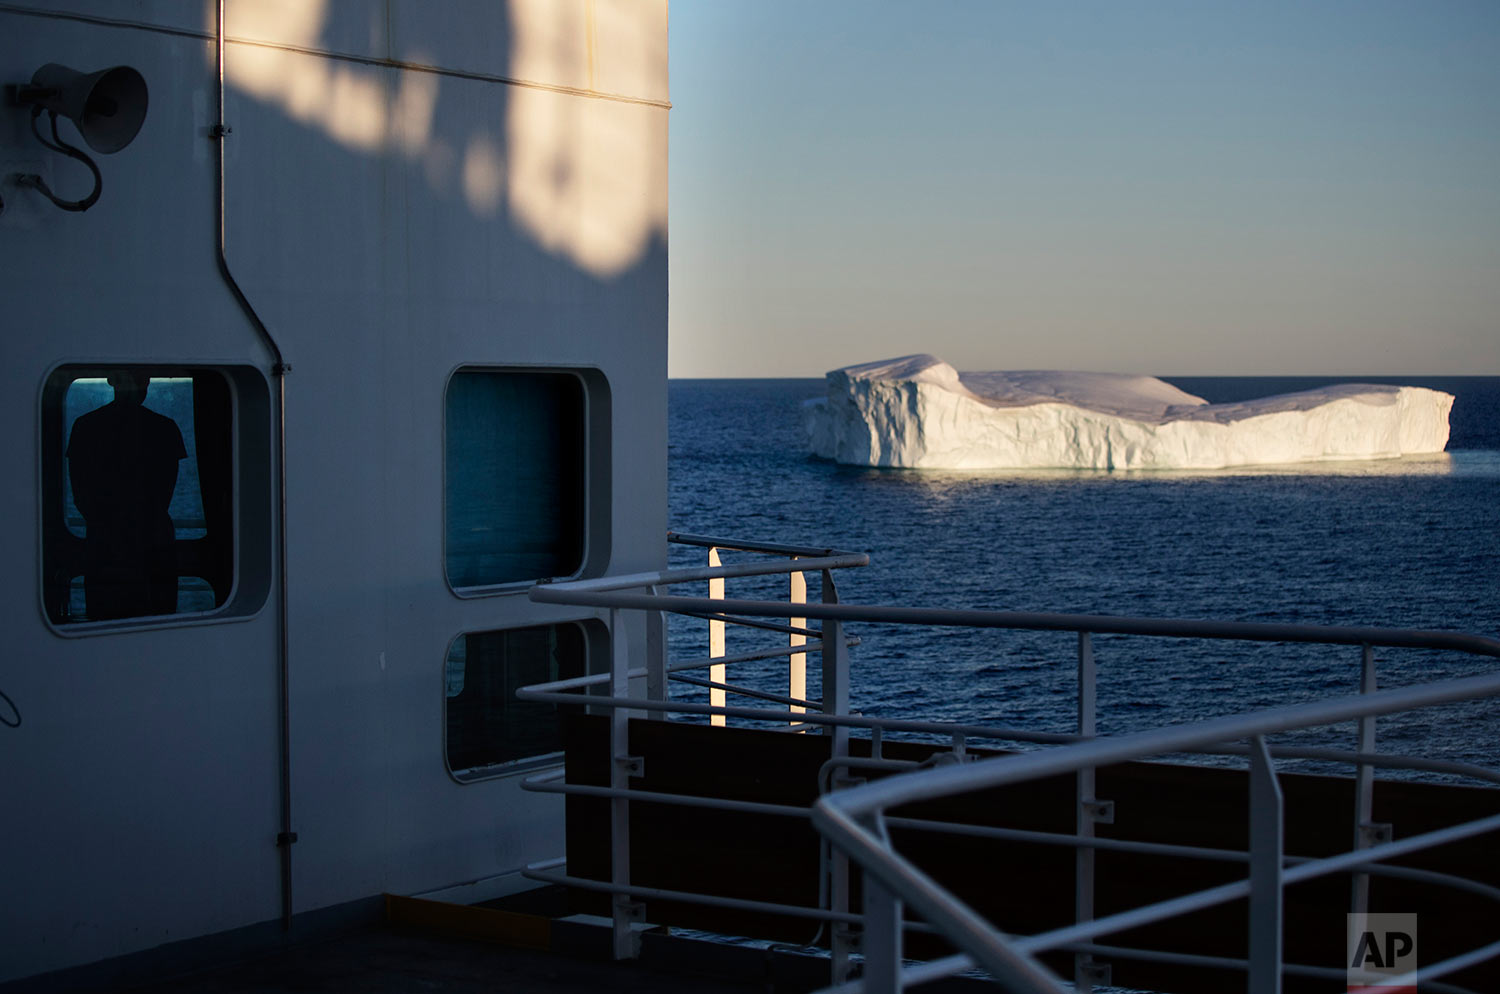  Trainee David Kullualik, left, looks out a window of the Finnish icebreaker MSV Nordica at an iceberg floating in Baffin Bay in the Canadian Arctic Archipelago, Tuesday, July 25, 2017. (AP Photo/David Goldman) 